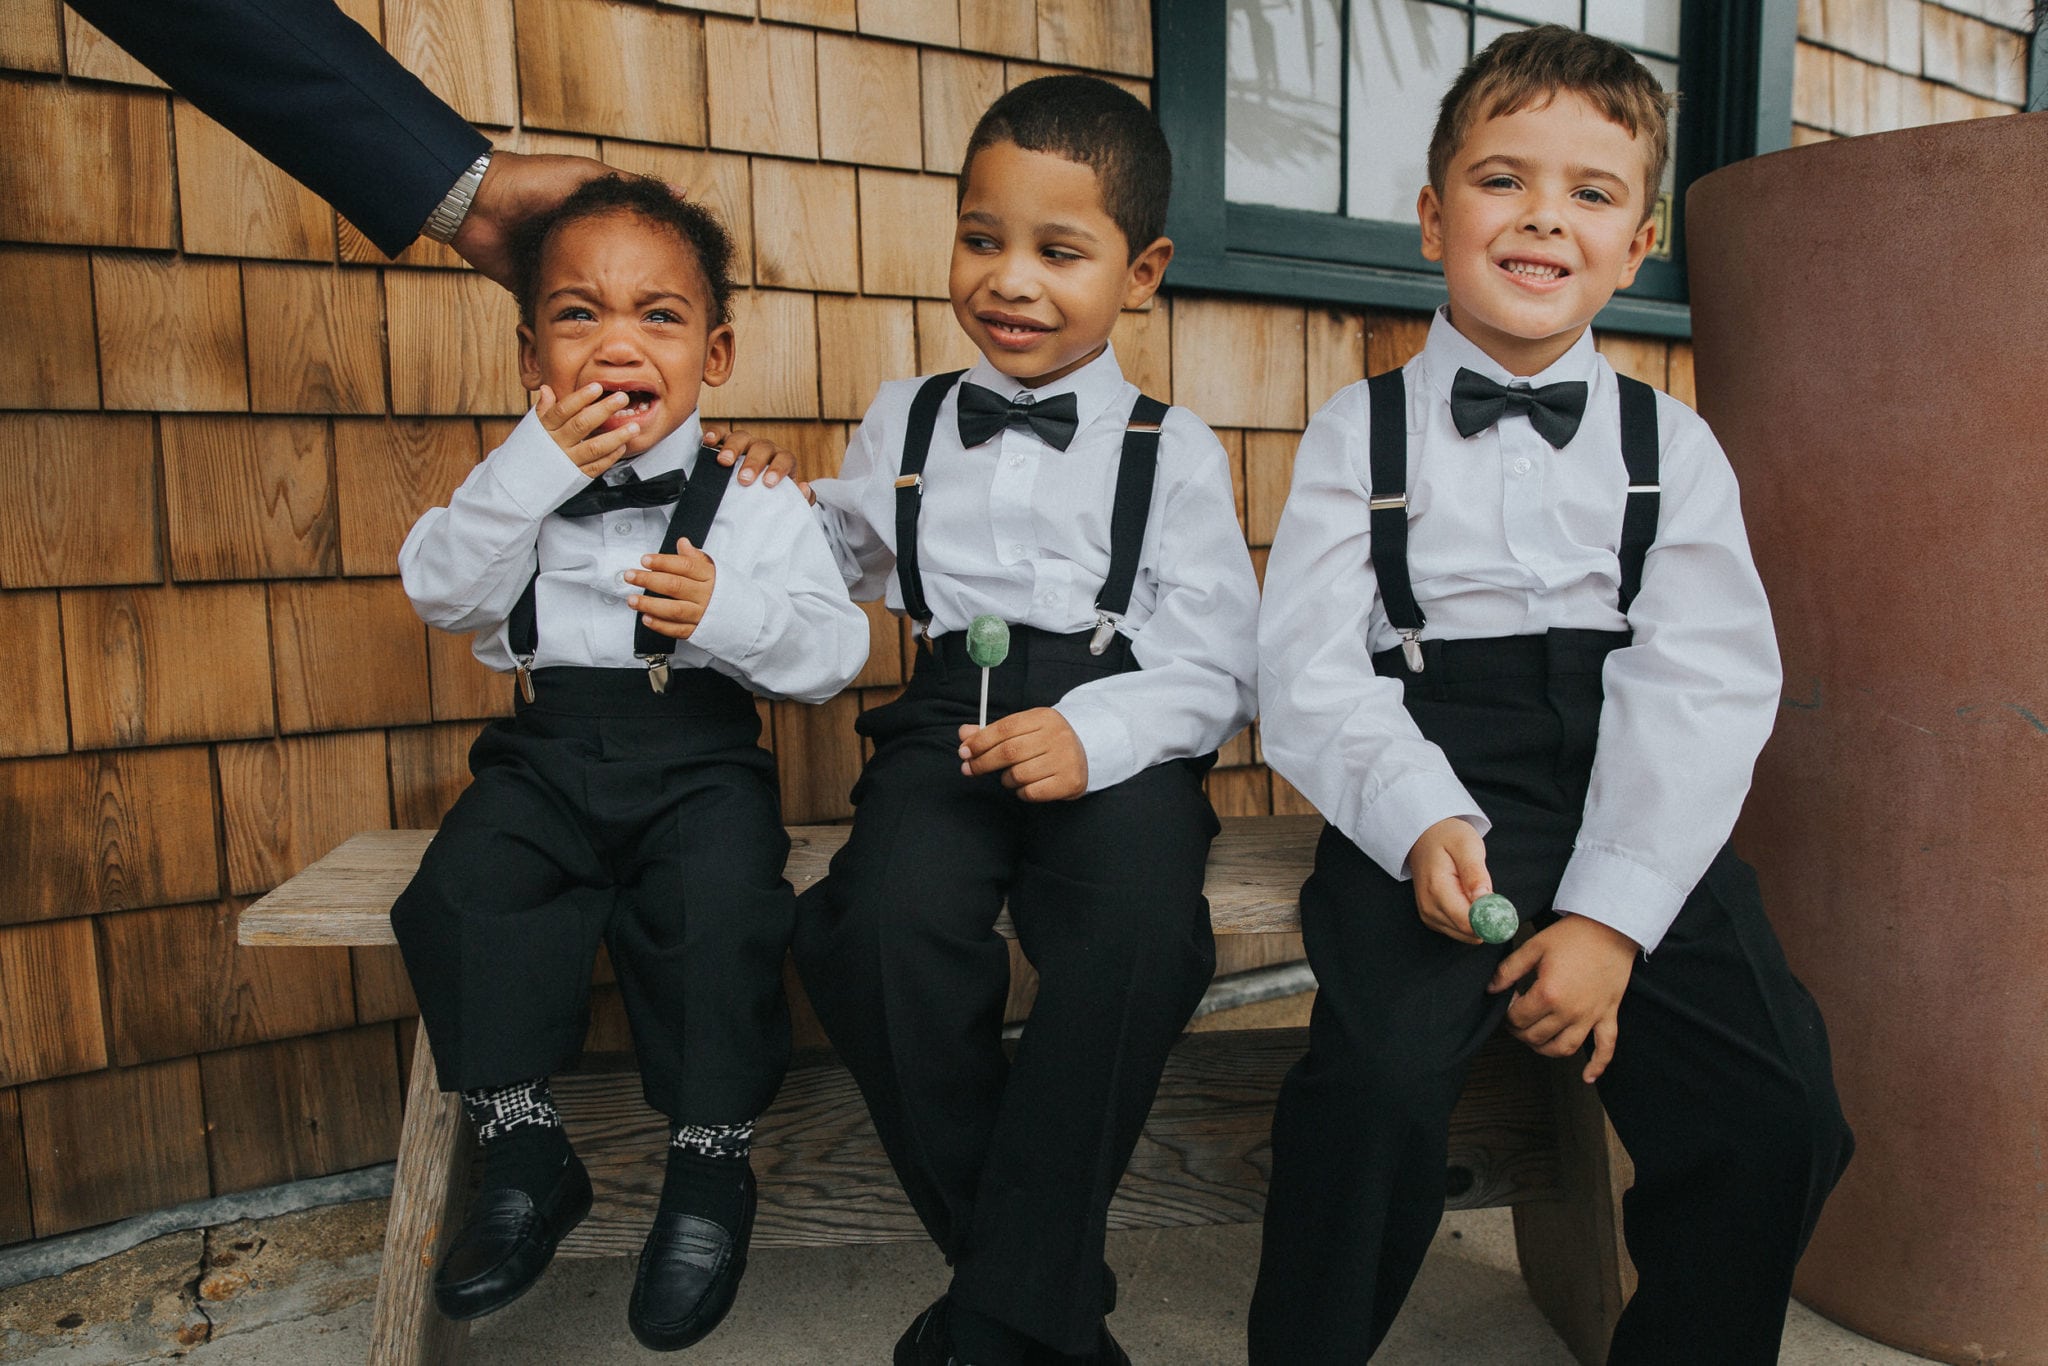 three little kids in white shirts, black pants, suspenders, and bow ties sitting on a bench near a wood shingled wall. The smallest one is crying while the middle one tries to comfort.